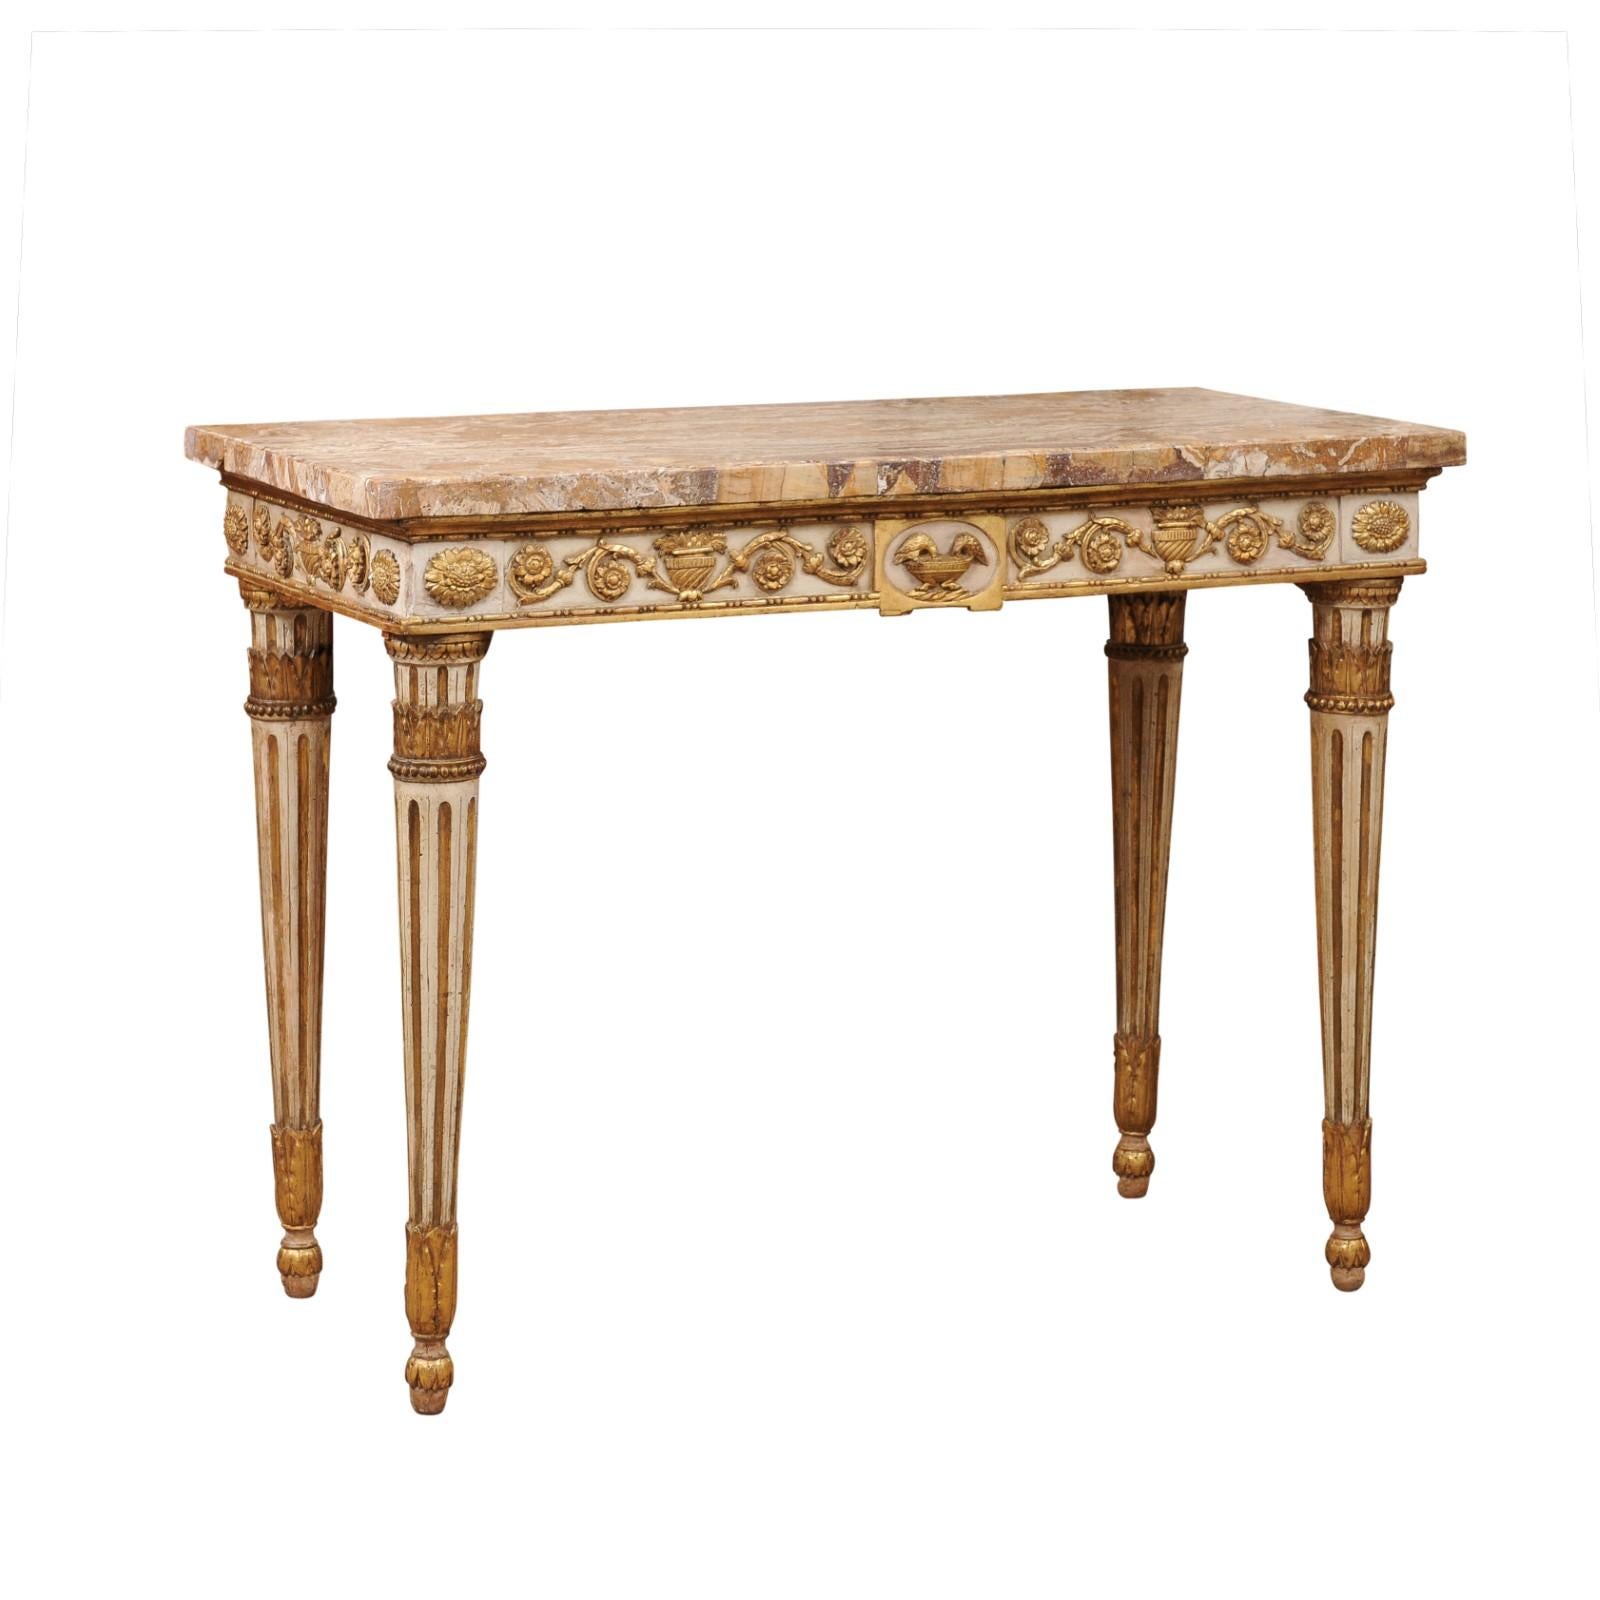 Late 18th Century Italian Painted and Parcel Gilt Neoclassical Console  For Sale 6